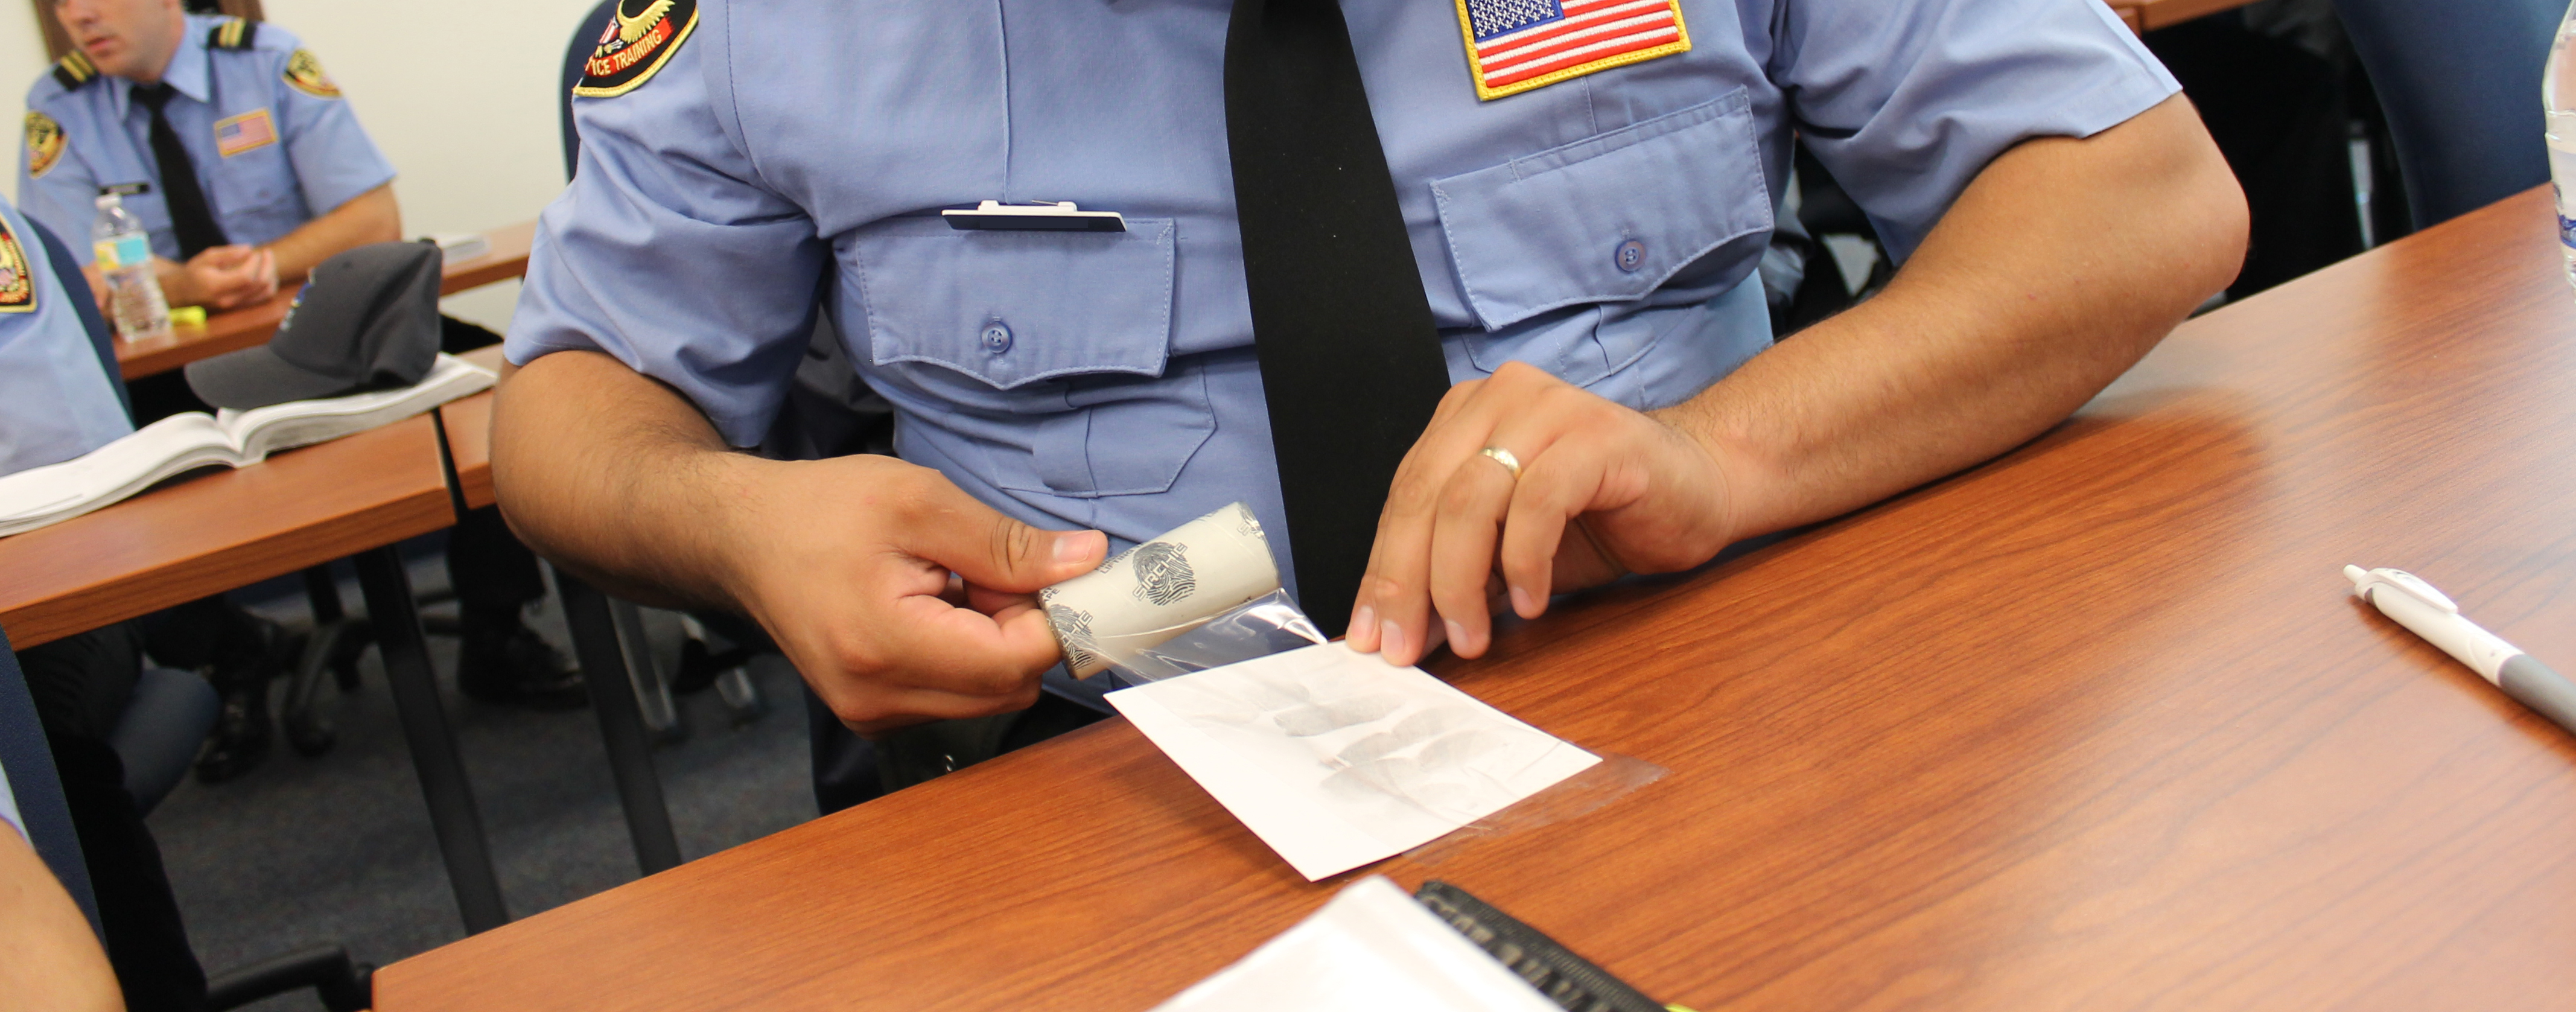 Law enforcement student learning to take finger print